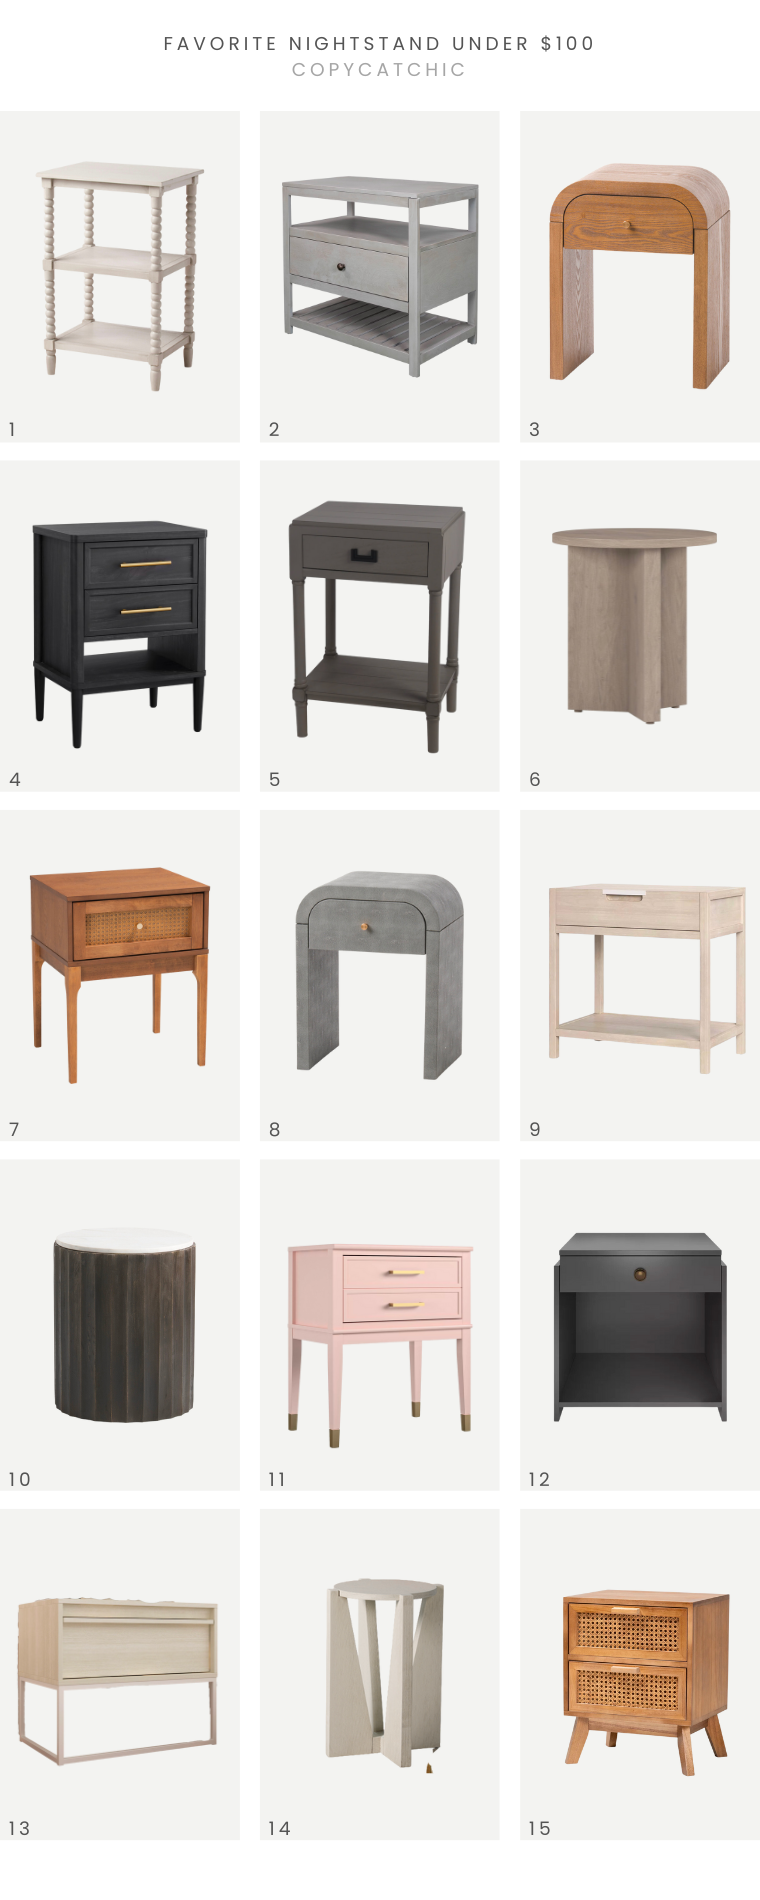 Favorite nightstands under $100, budget nightstands, stylish nightstands for less, look for less, copycatchic luxe living for less, budget home decor and design, daily dupes, home trends, sales, budget travel and room inspiration